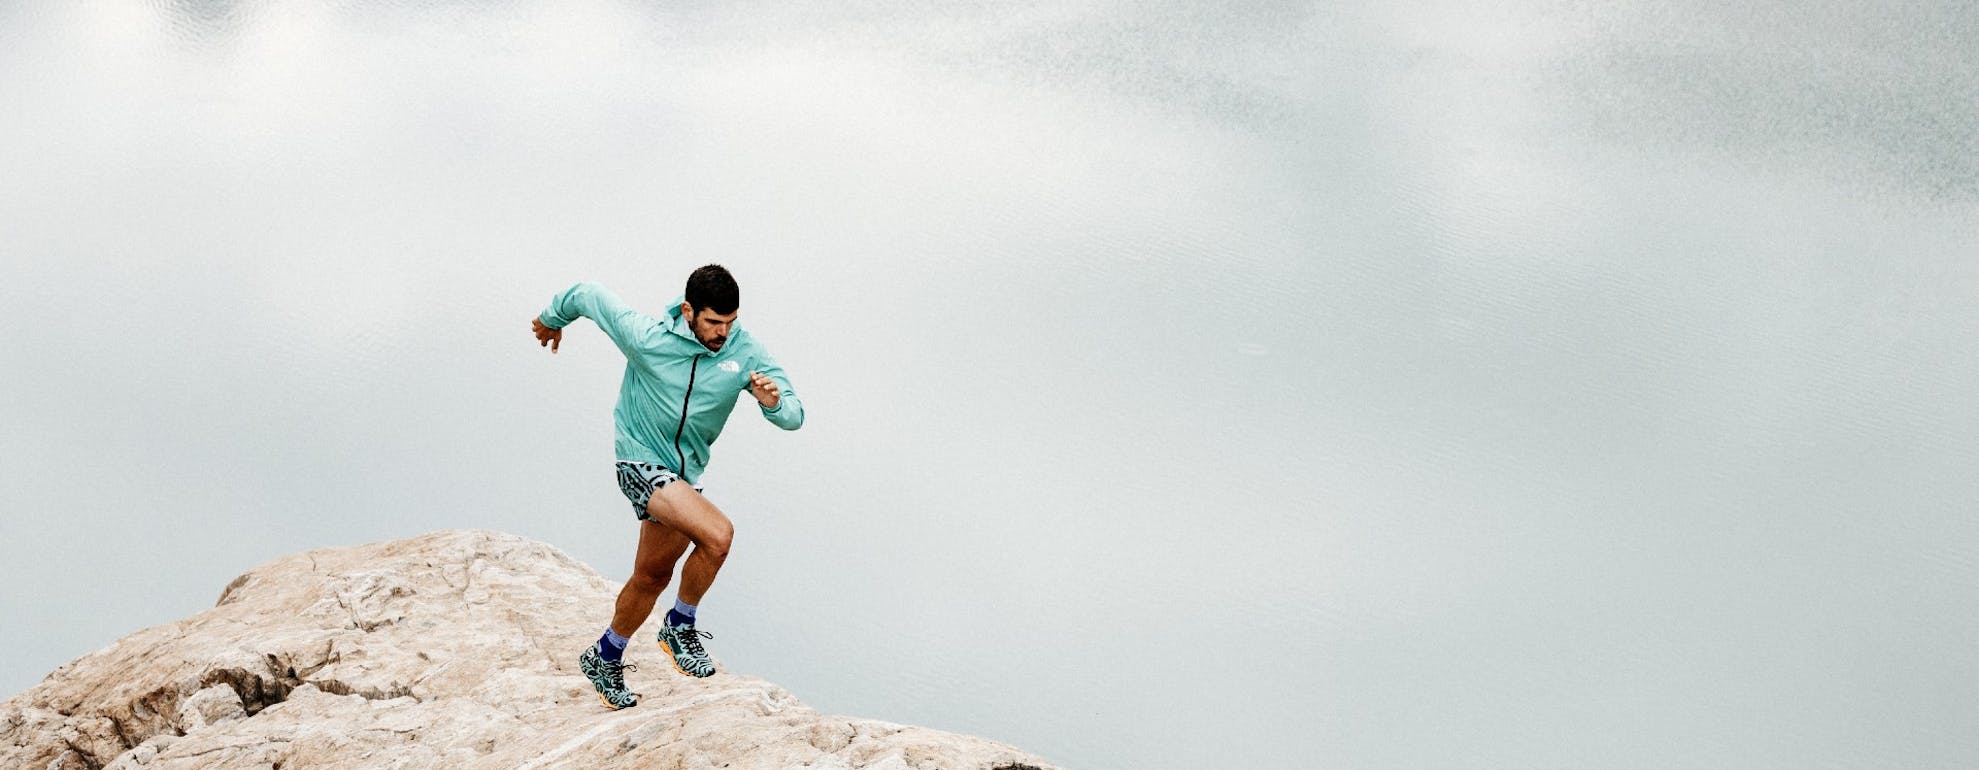 Q&A with The North Face athlete Pau Capell